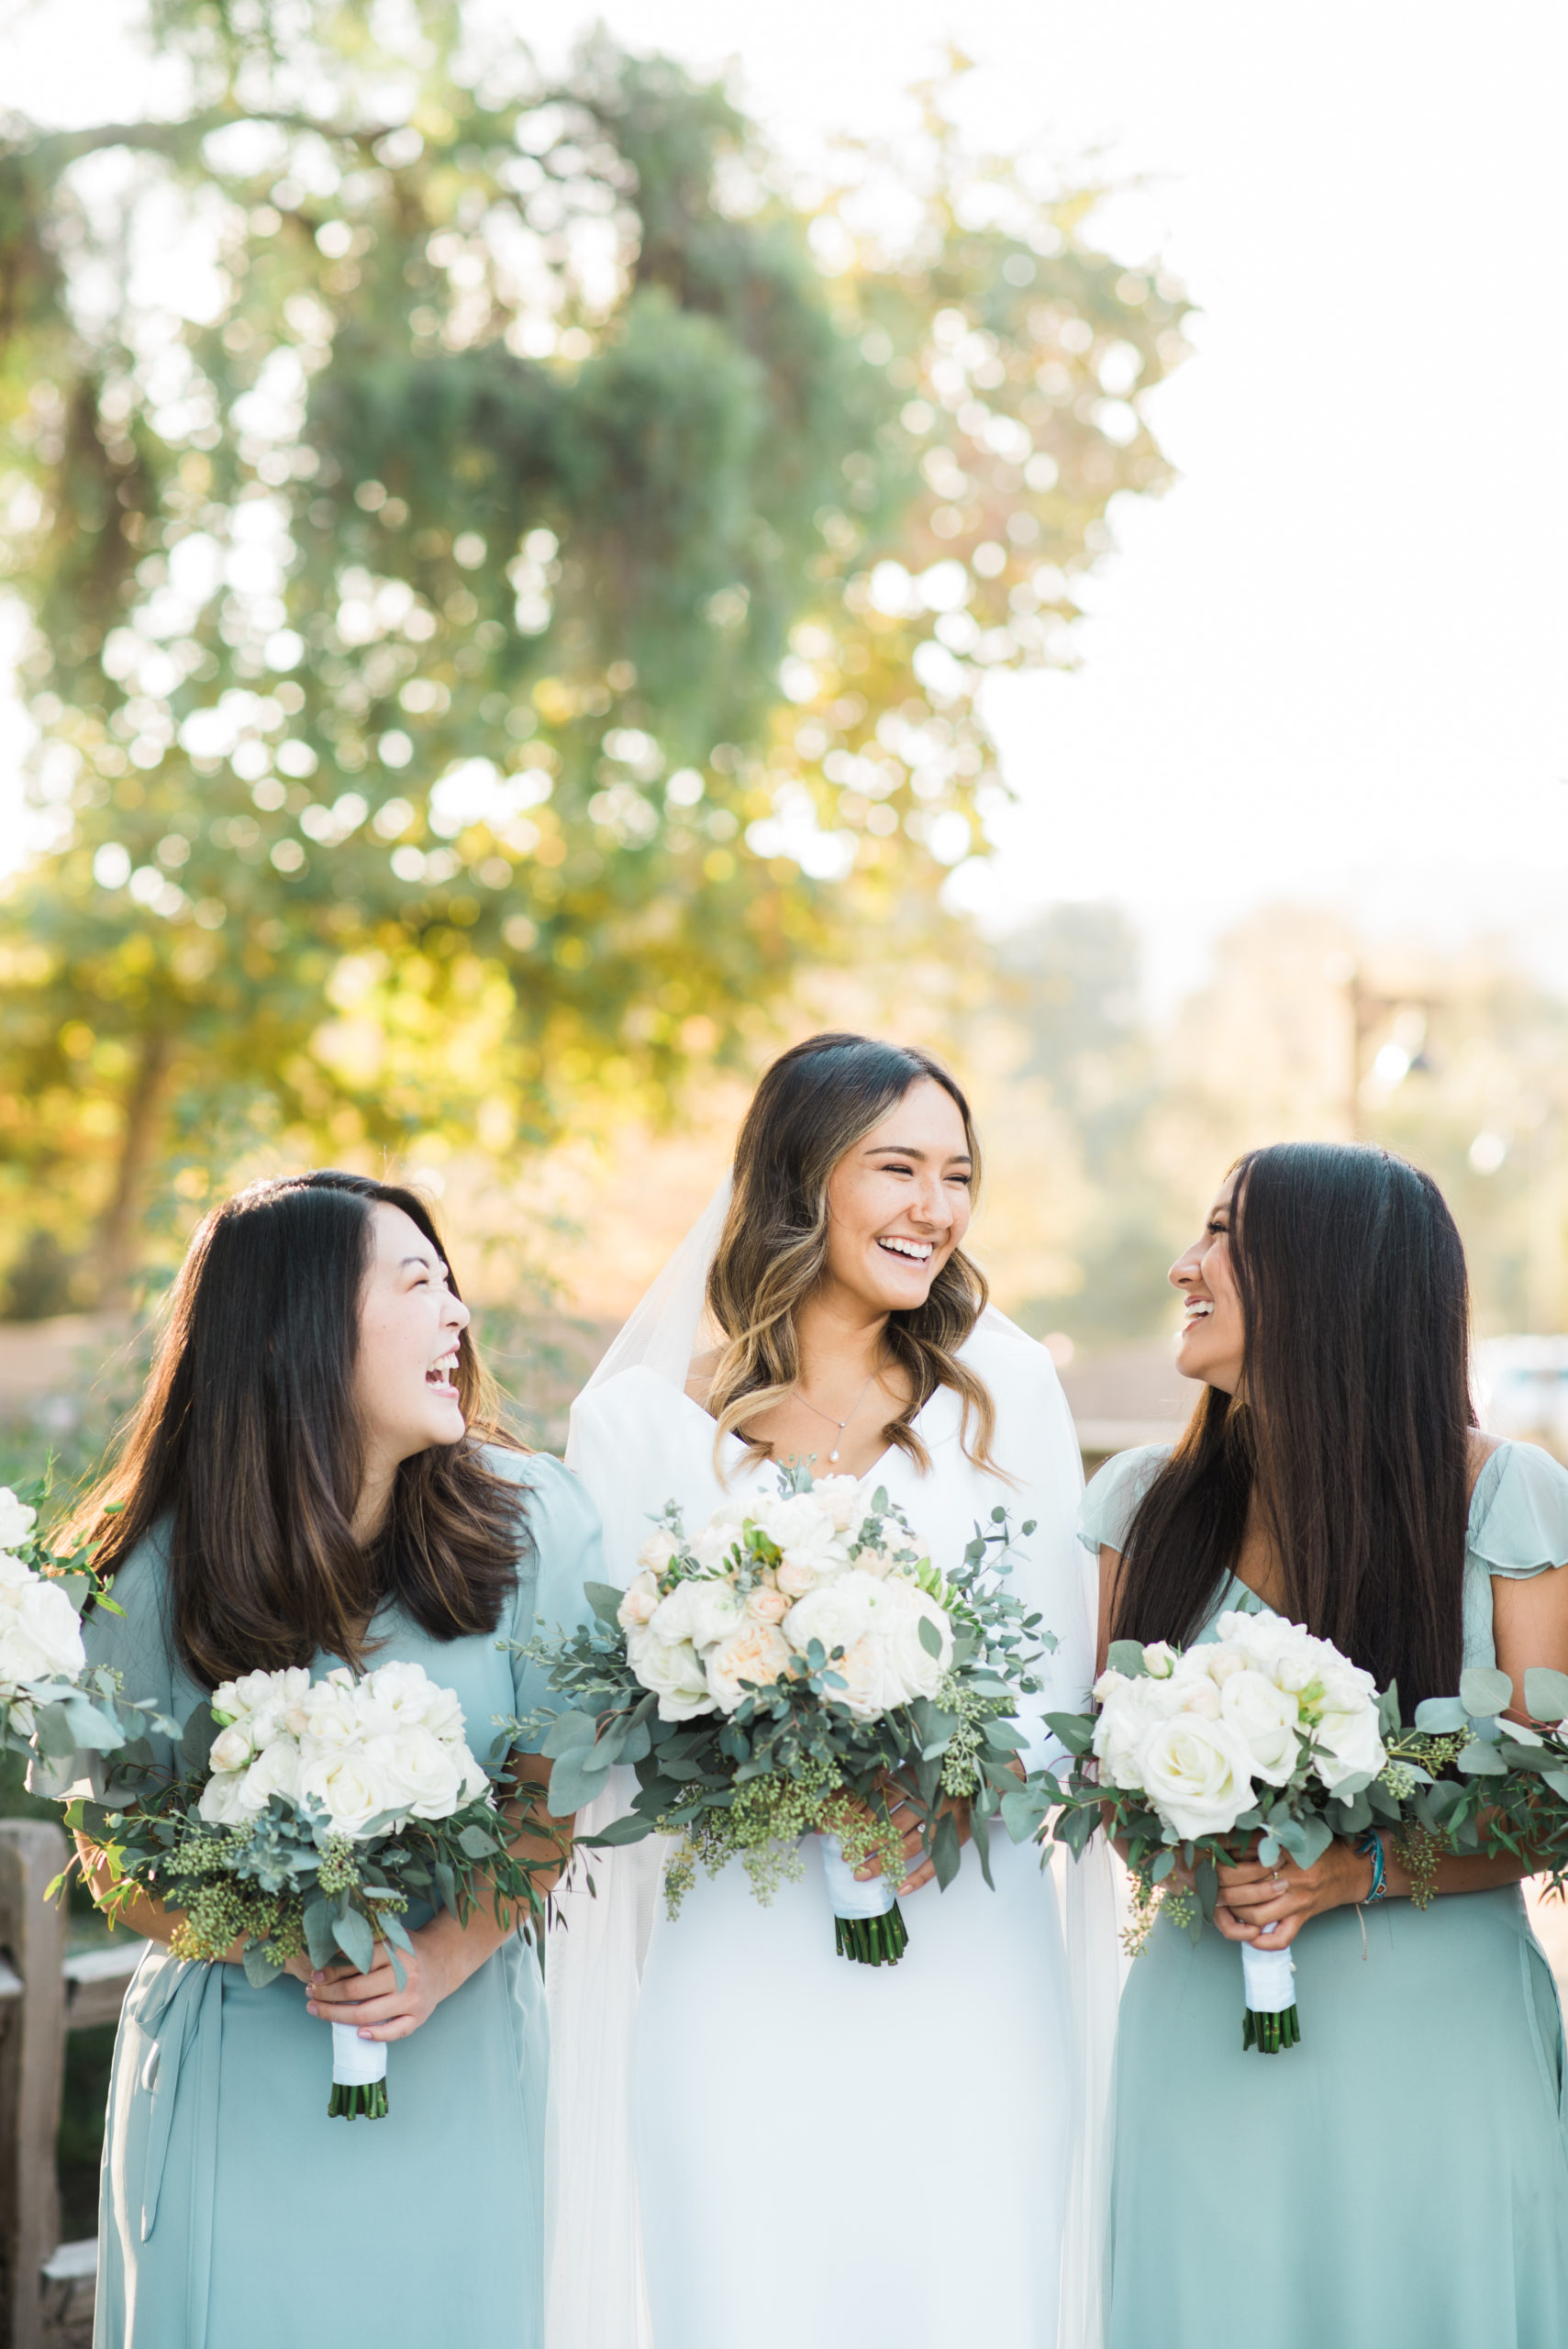 Bride and Bridesmaids Laughing in a Garden Wedding in Orange County